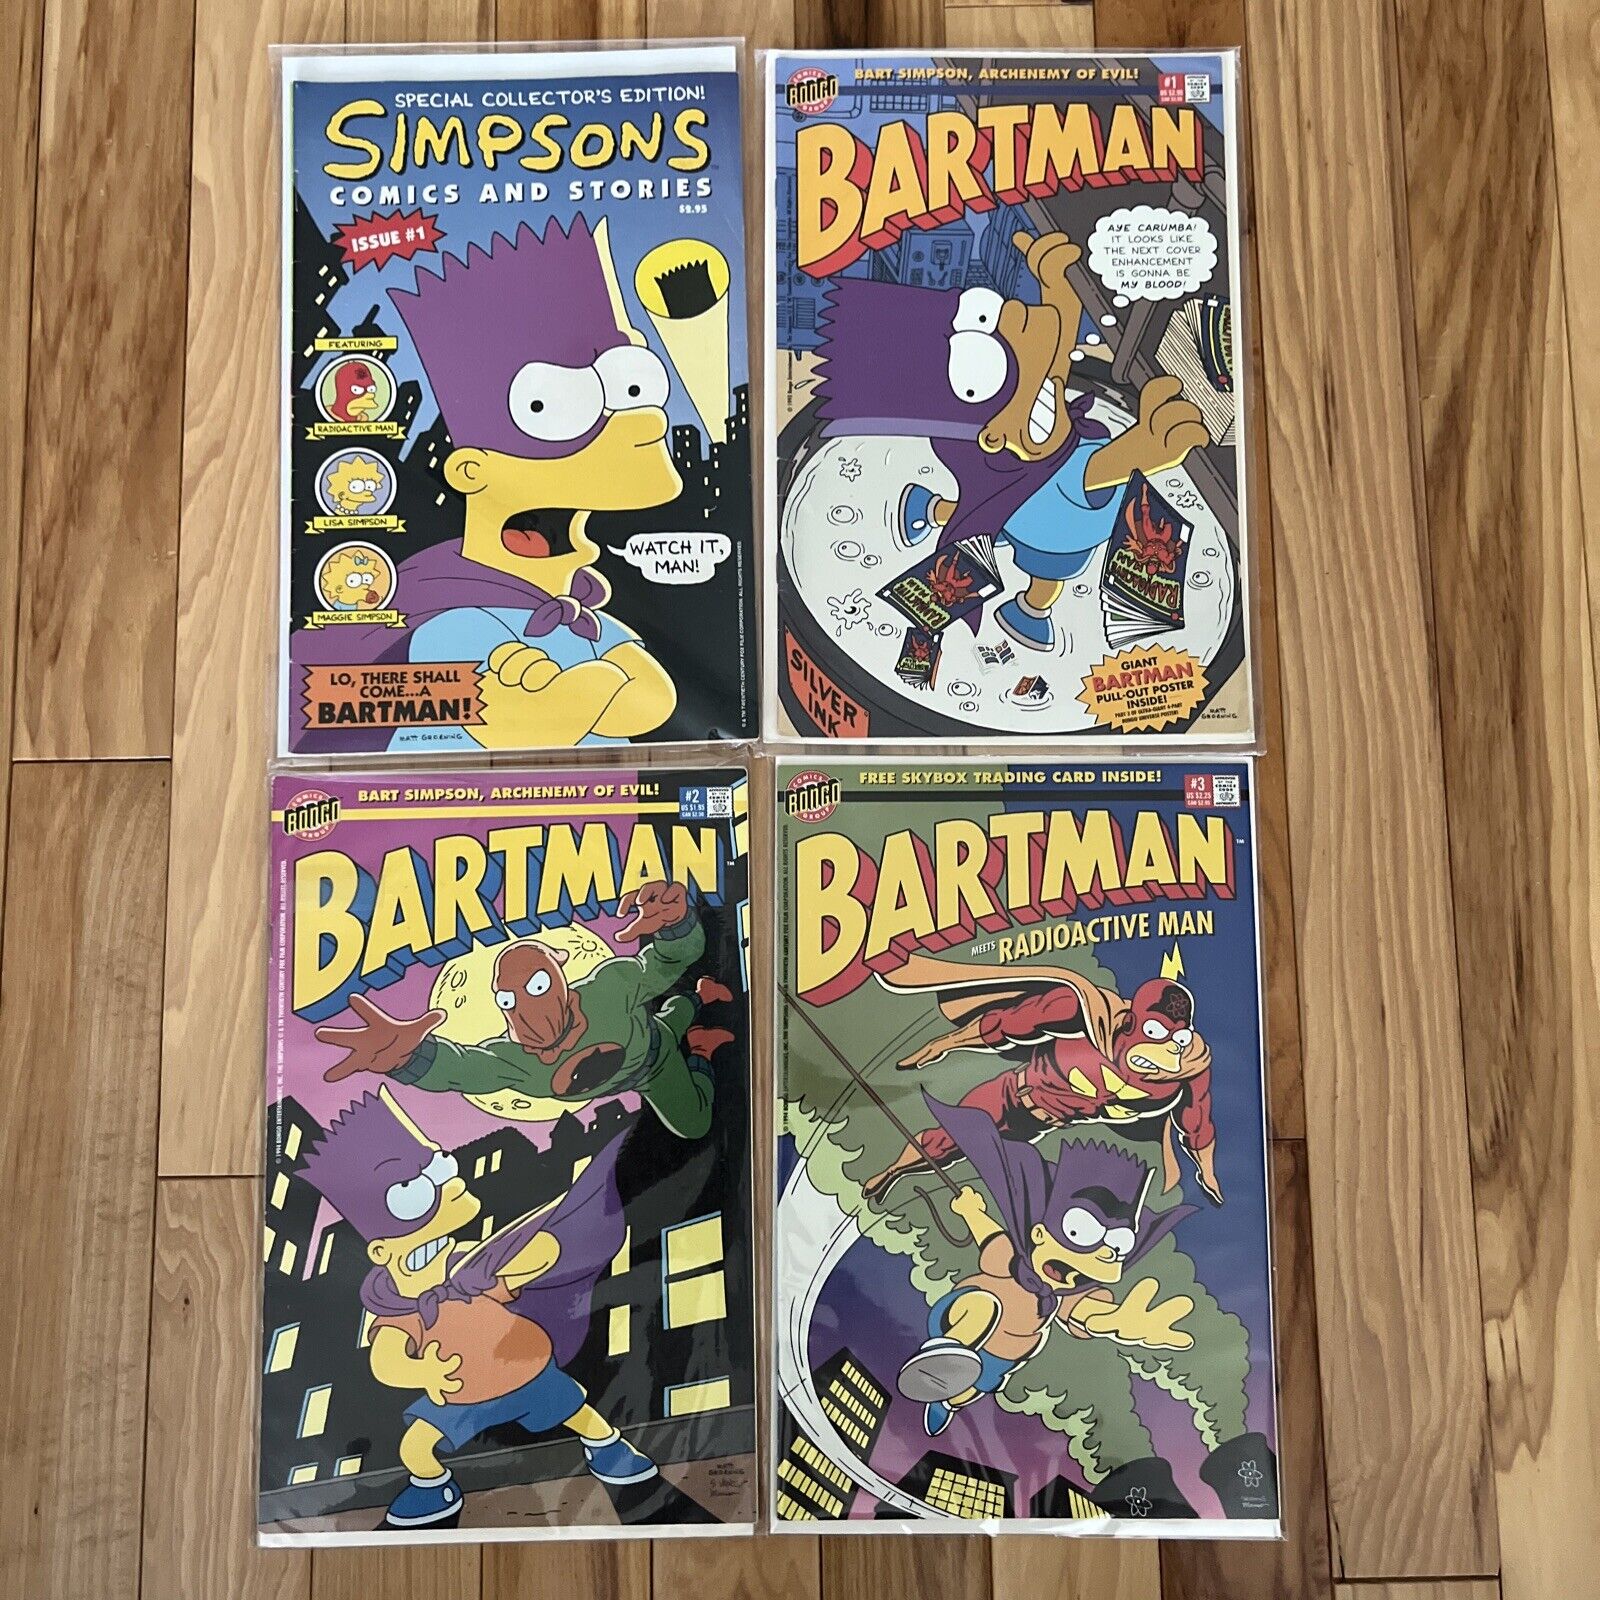 SIMPSONS COMICS AND STORIES #1 and BARTMAN #1 Foil - No Poster, 2 & 3 - 4 Issues